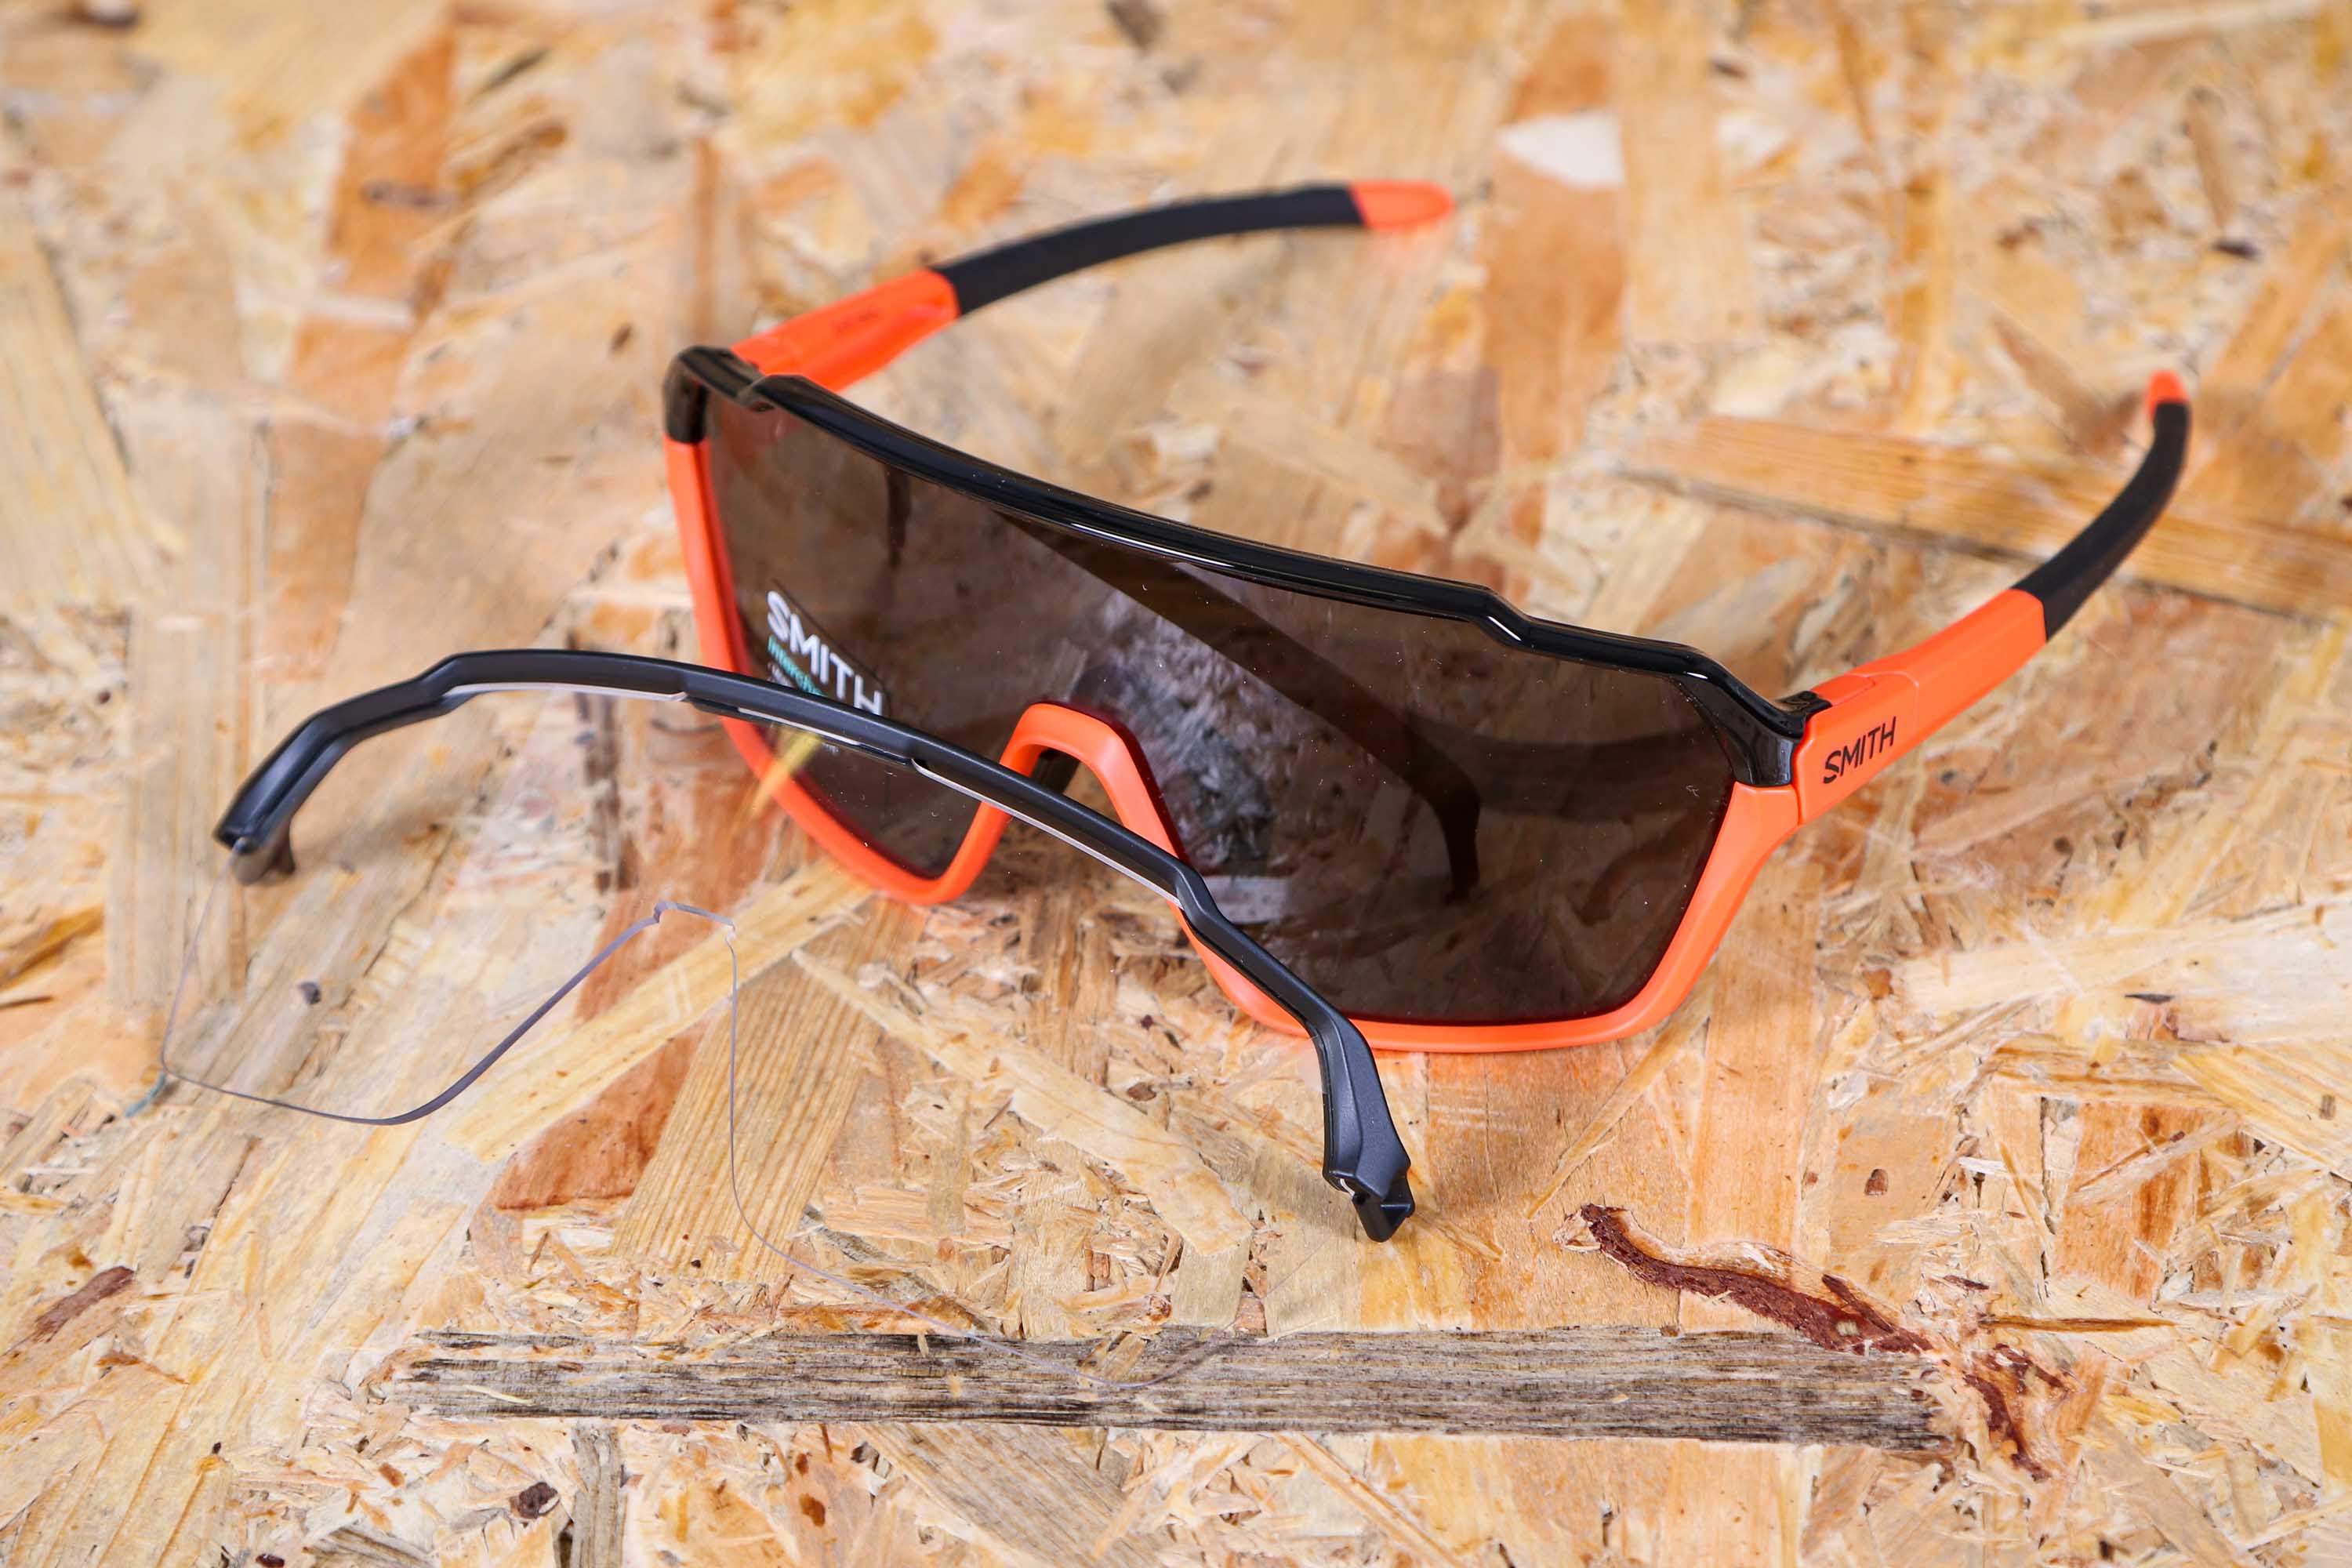 Review: Smith Shift MAG sunglasses | road.cc